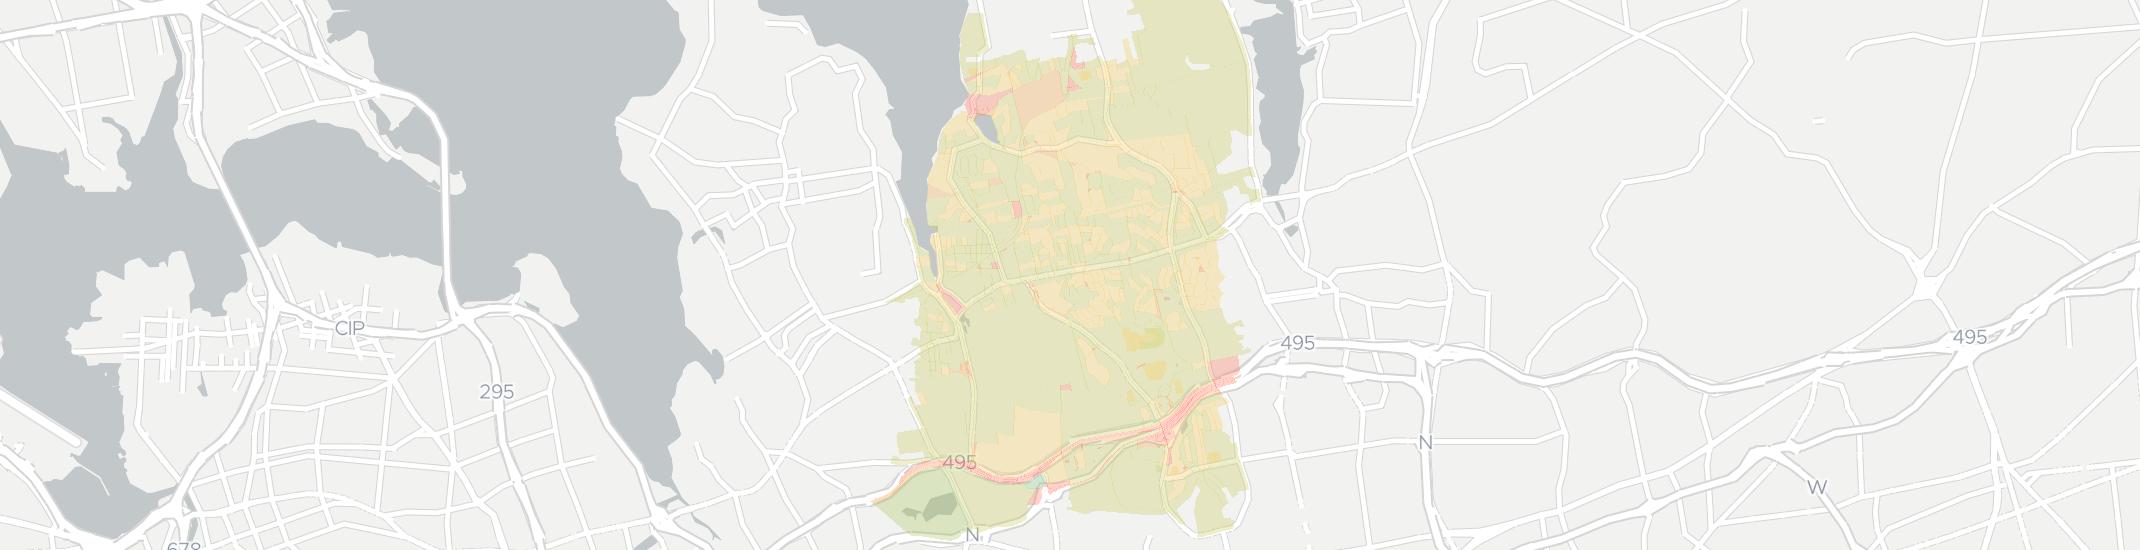 Manhasset Internet Competition Map. Click for interactive map